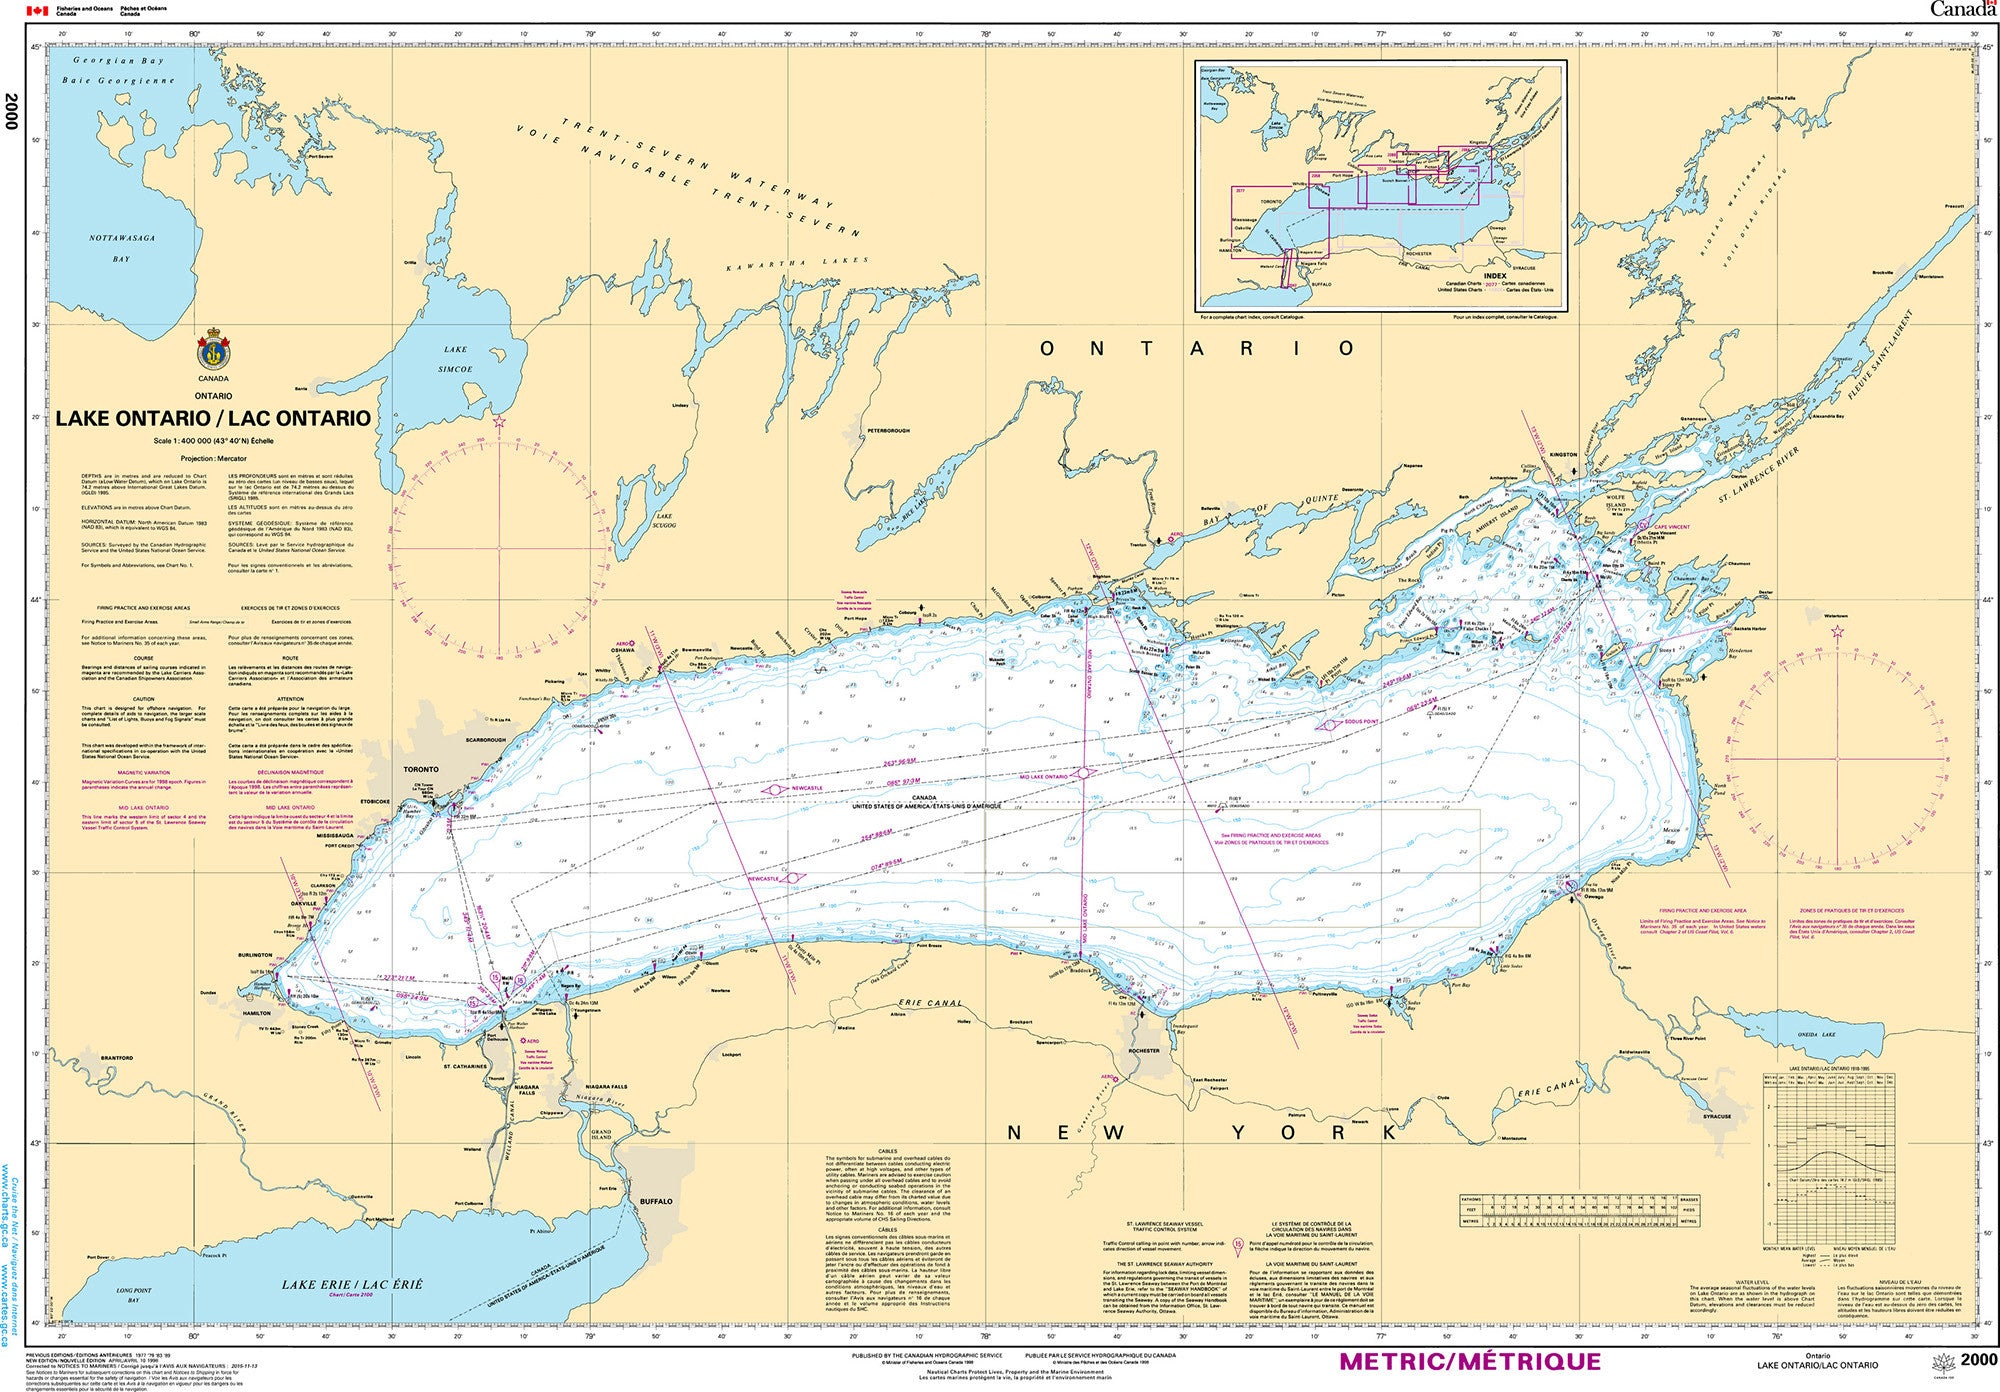 Canadian Hydrographic Service Nautical Chart CHS2000: Lake Ontario/Lac Ontario